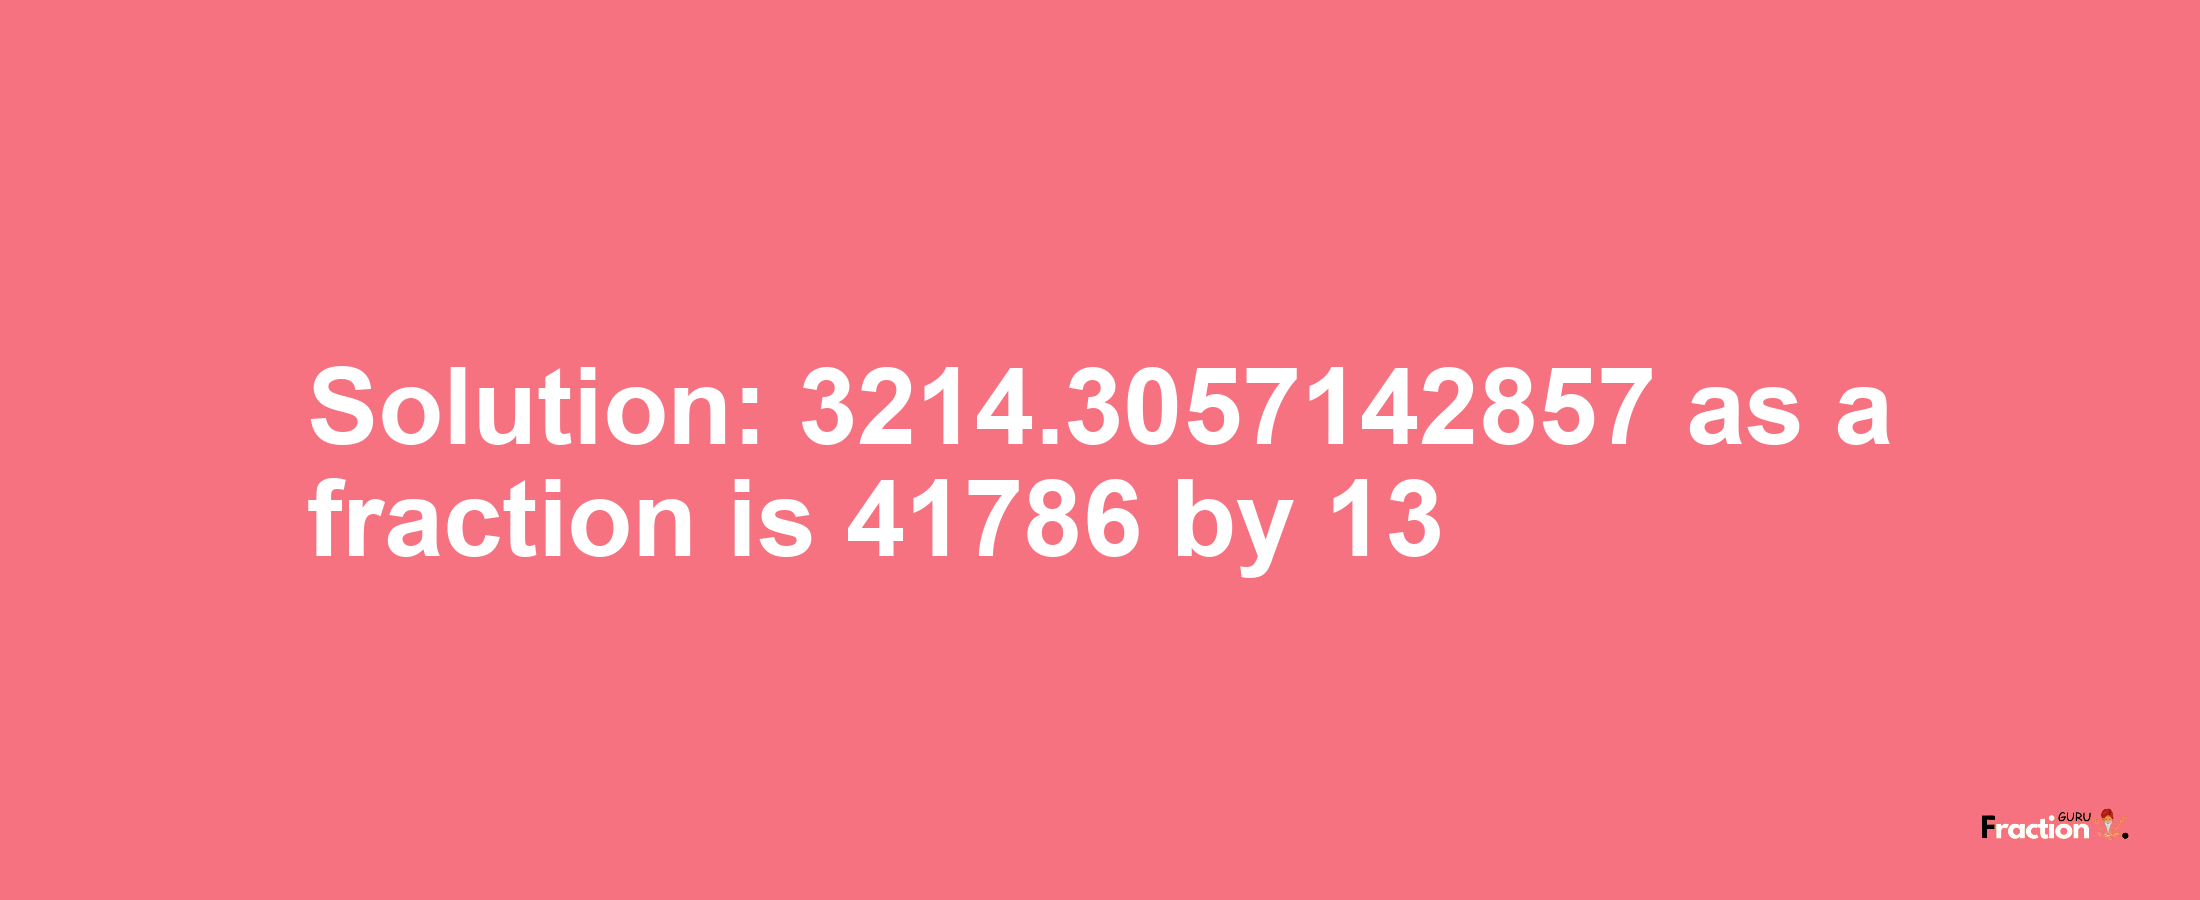 Solution:3214.3057142857 as a fraction is 41786/13